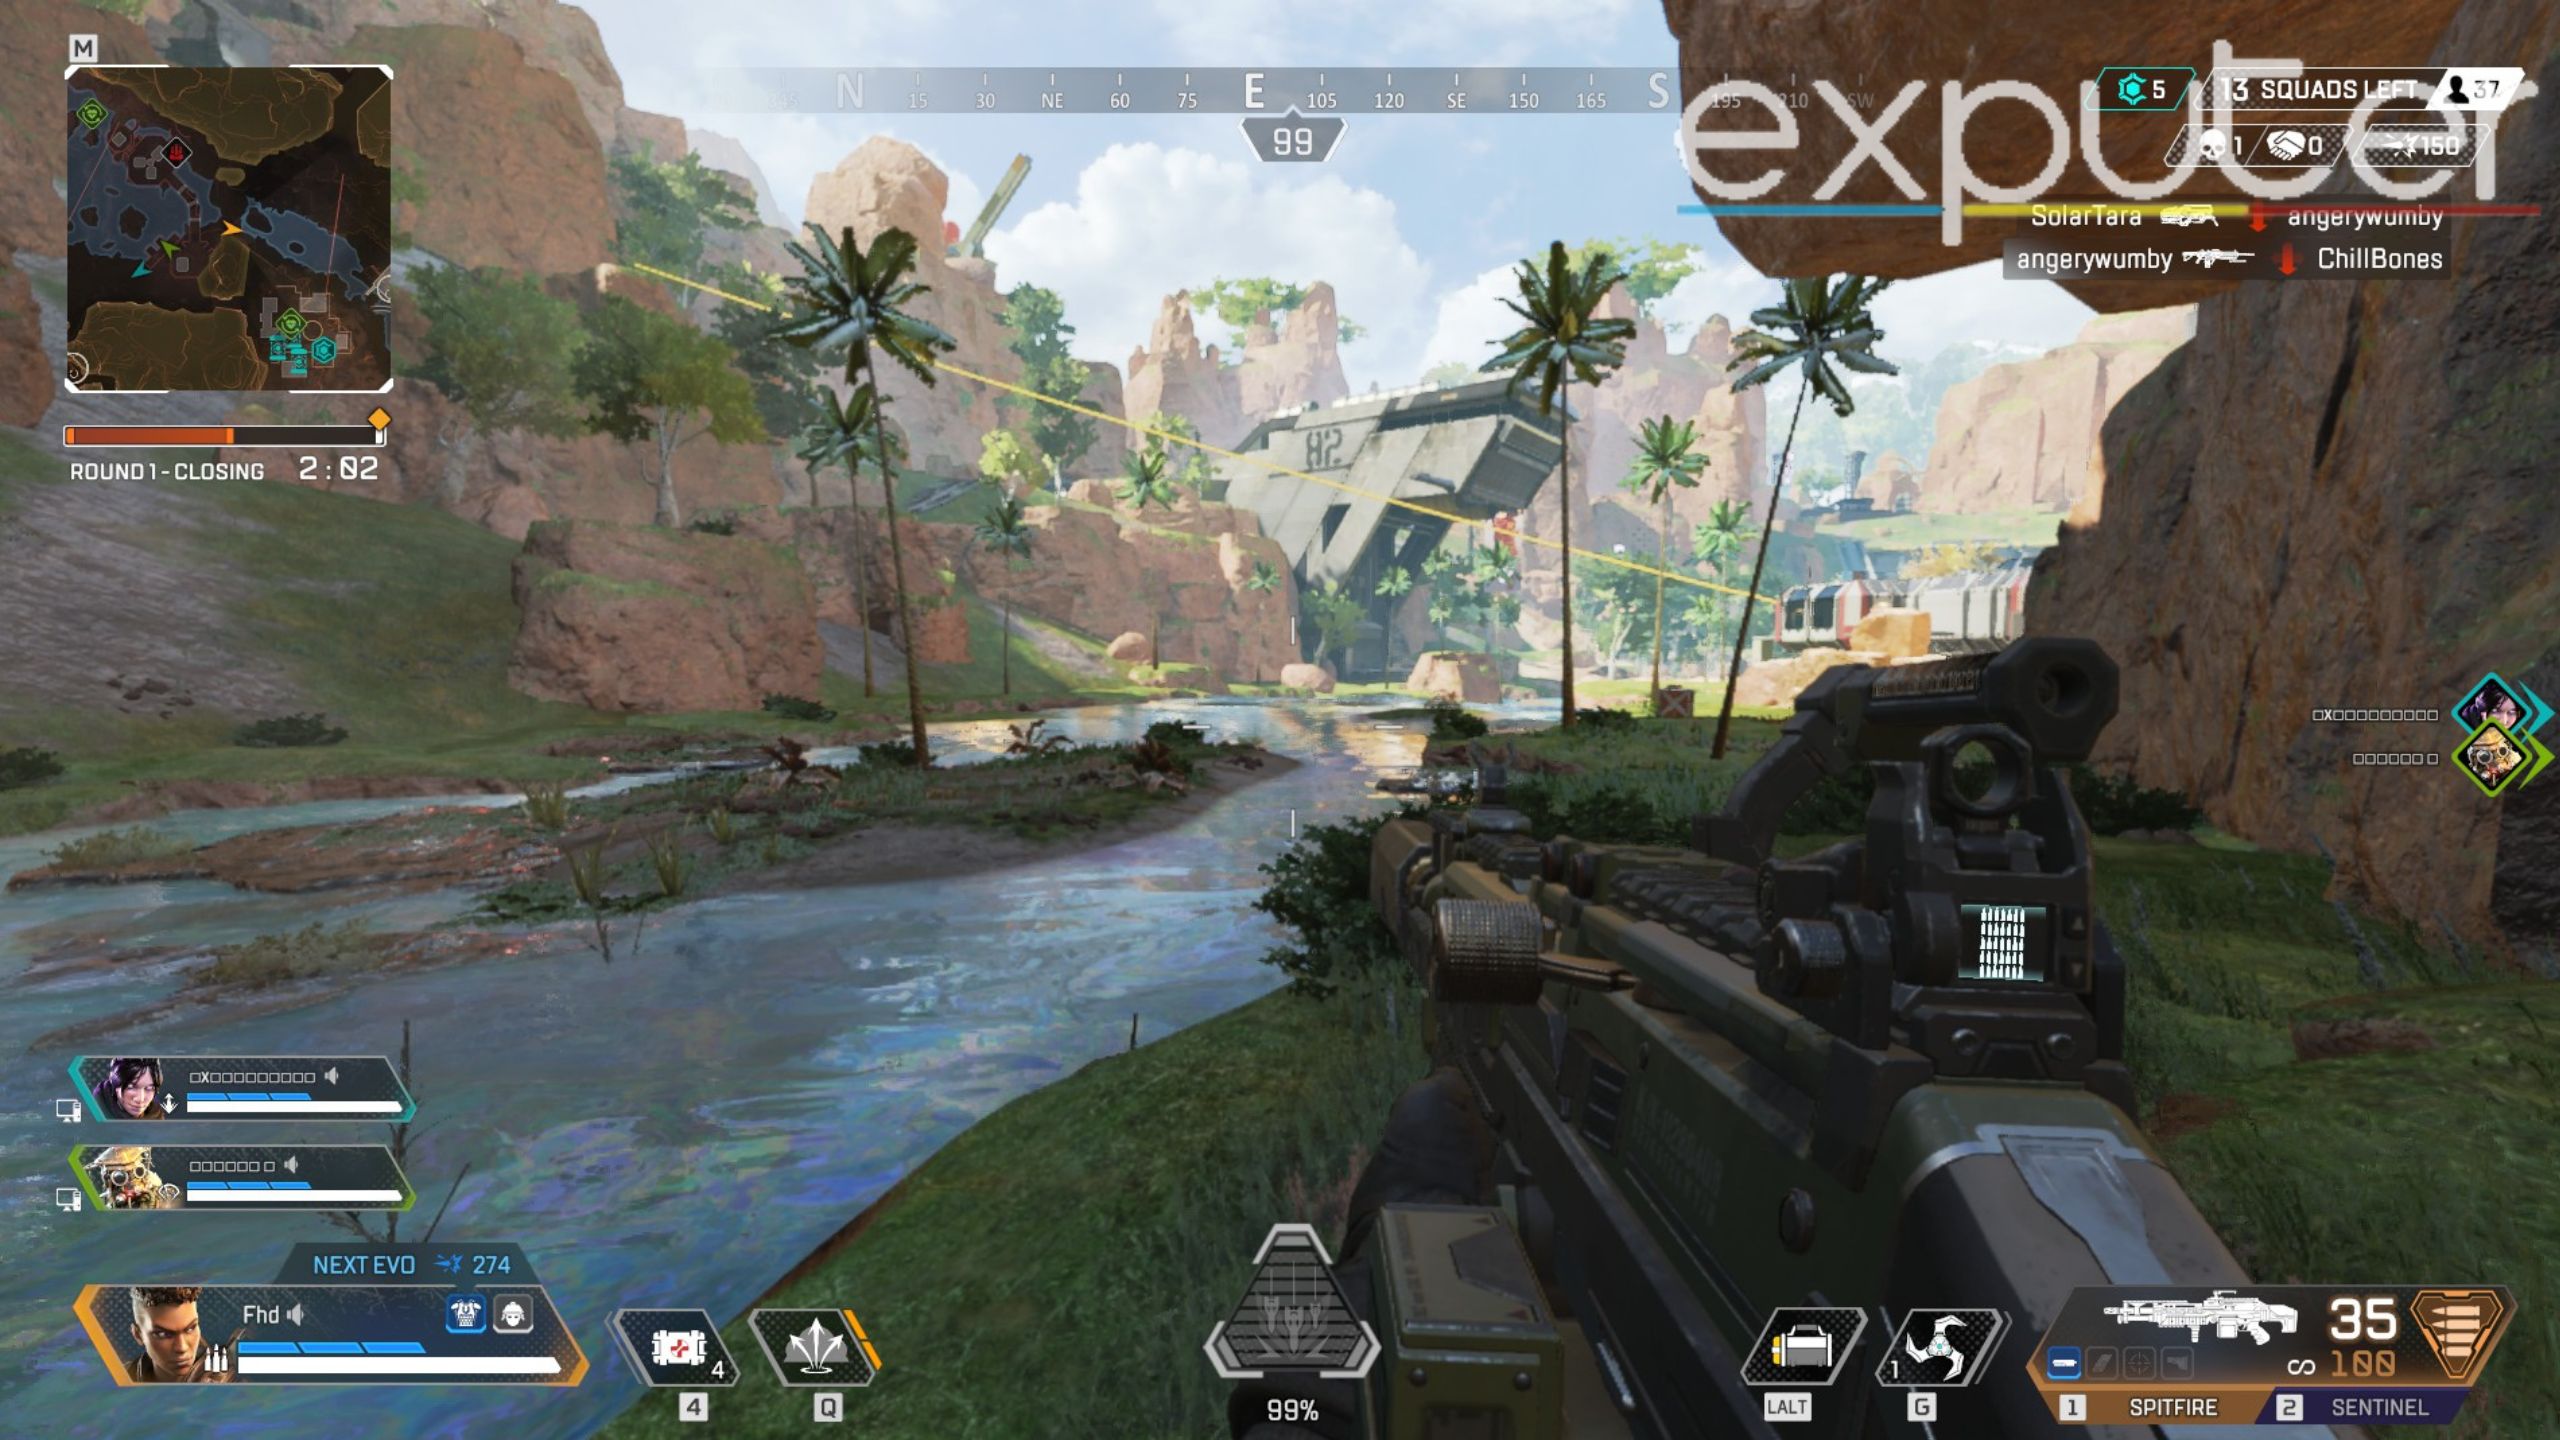 Visuals of gameplay. (Image captured by eXputer)